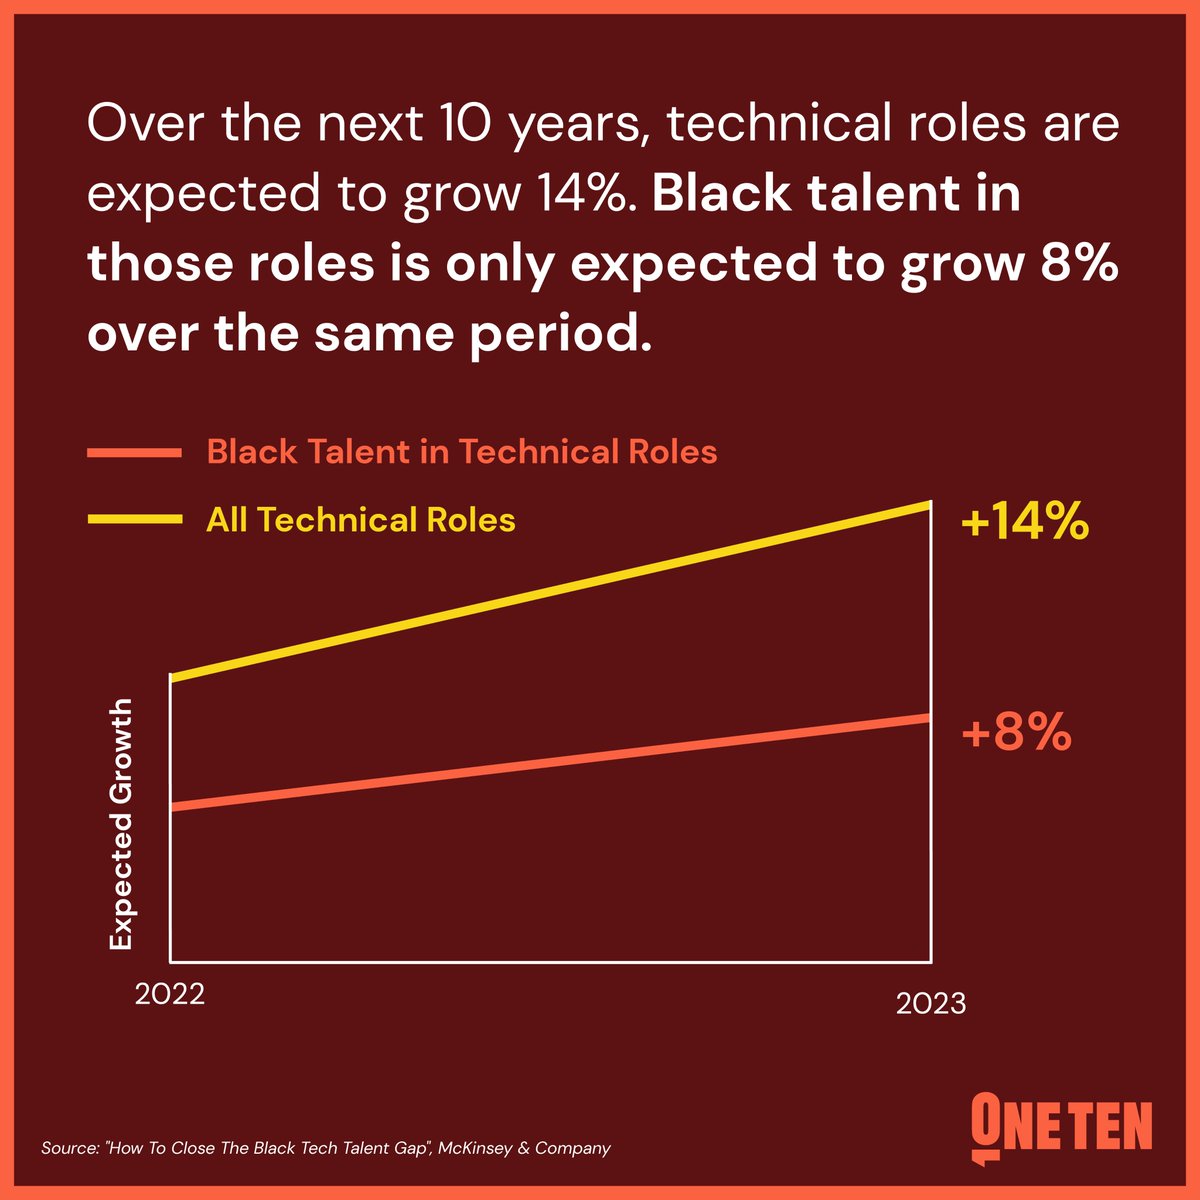 According to @McKinsey, talent within data science, cybersecurity, software development and engineering roles is only expected to grow by 8% by 2032. Learn why businesses risk billions if Black talent continues to be underrepresented in tech roles: mck.co/4cJh4Uv